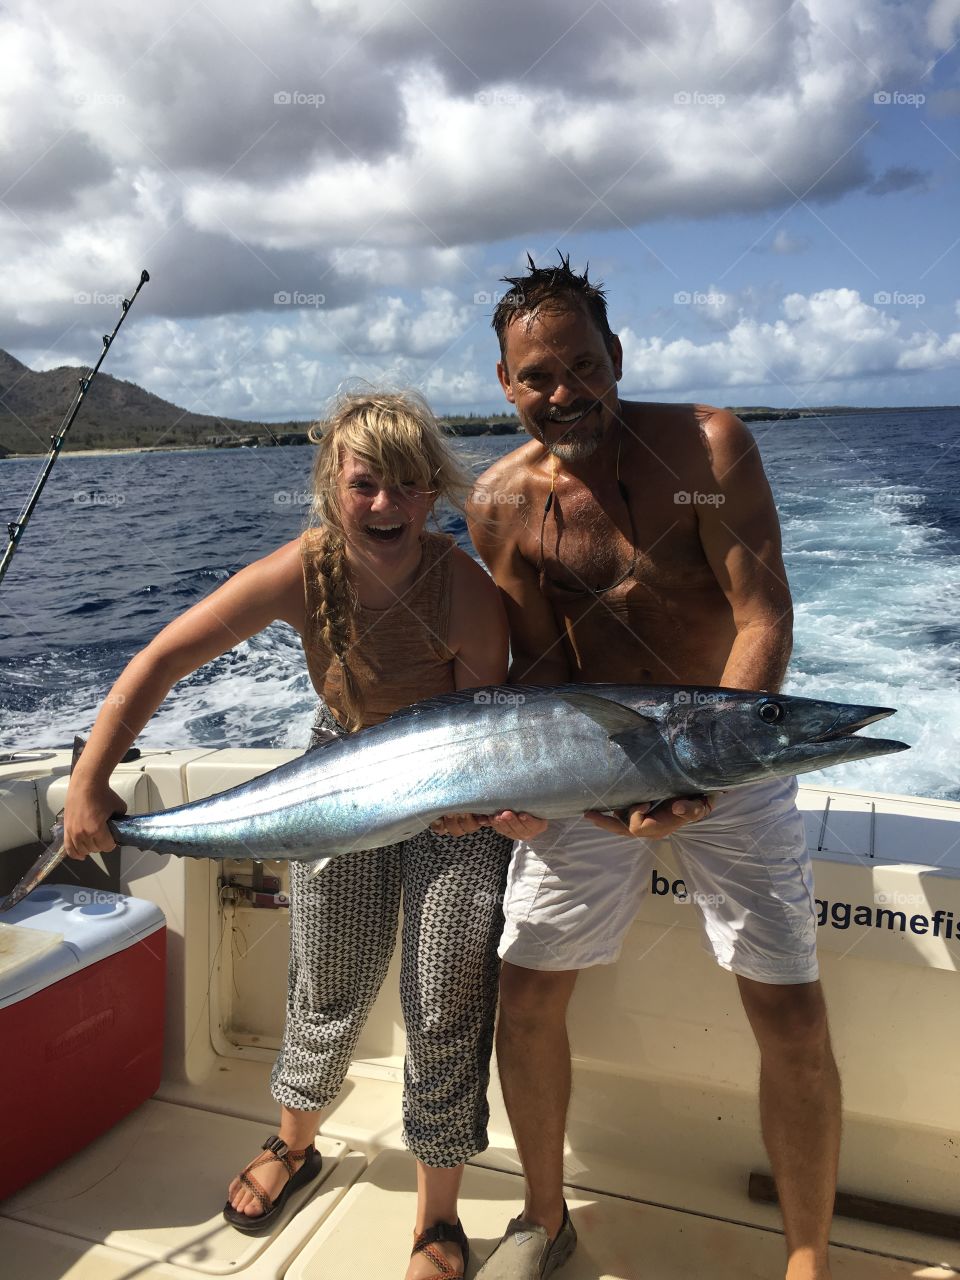 We caught the big one. A huge catch off the shore of Bonaire. Big smiles, hair blowing in the wind, and sunshine all around 